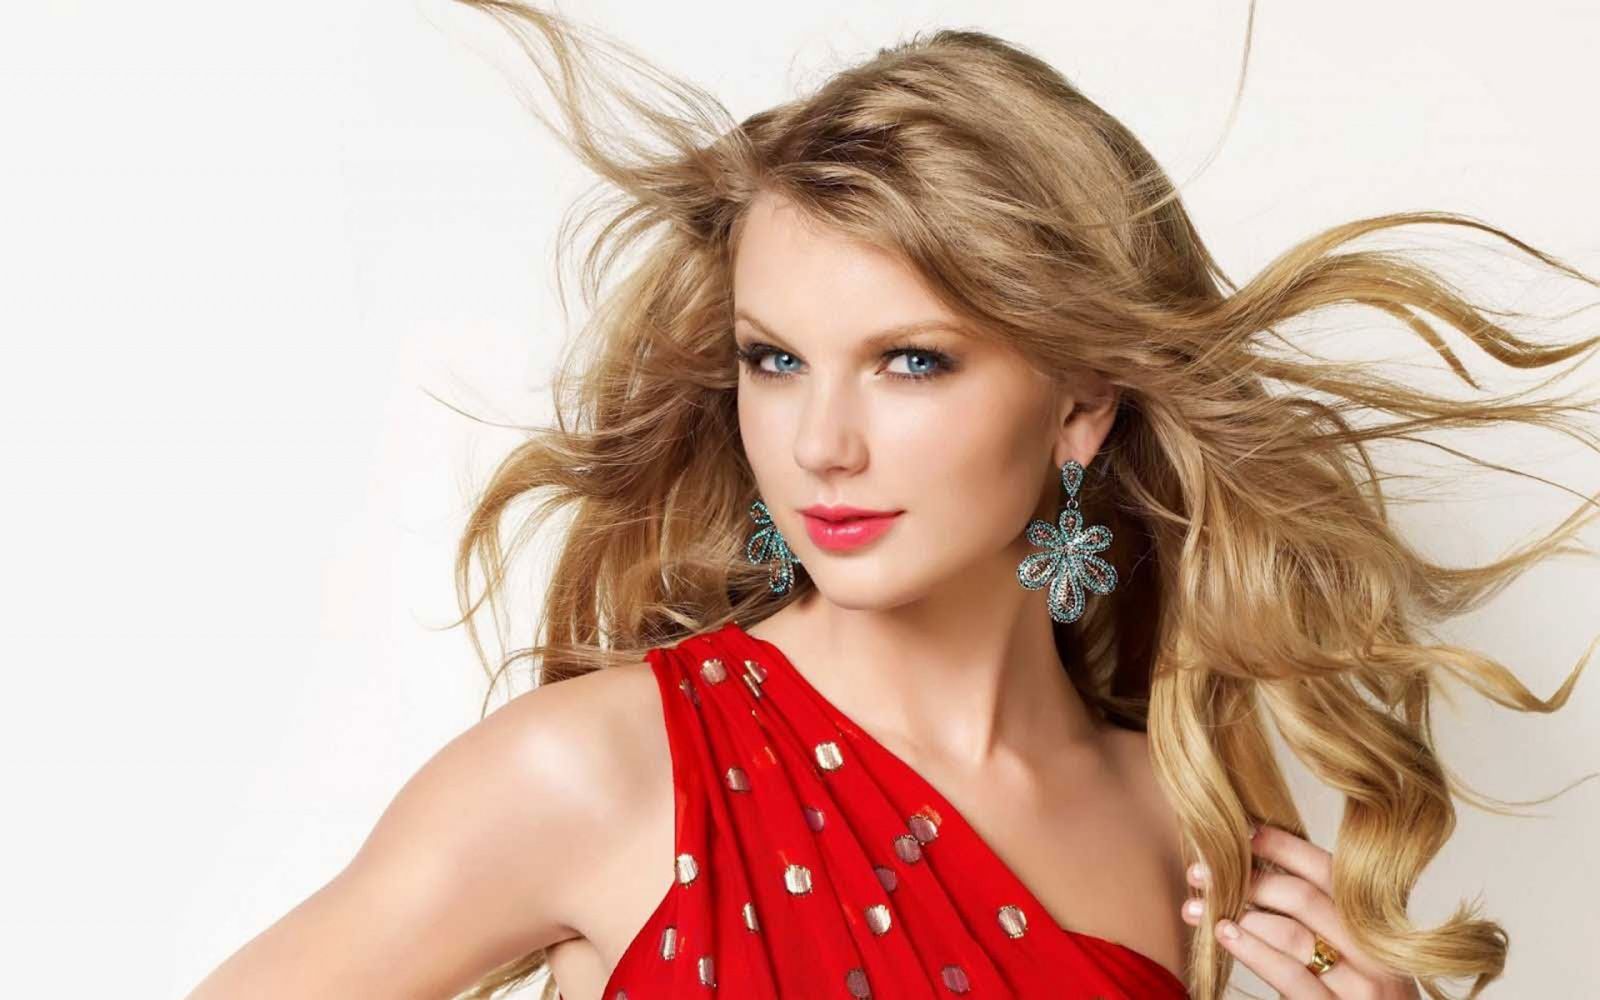 Taylor Swift becomes highest paid woman artiste in music